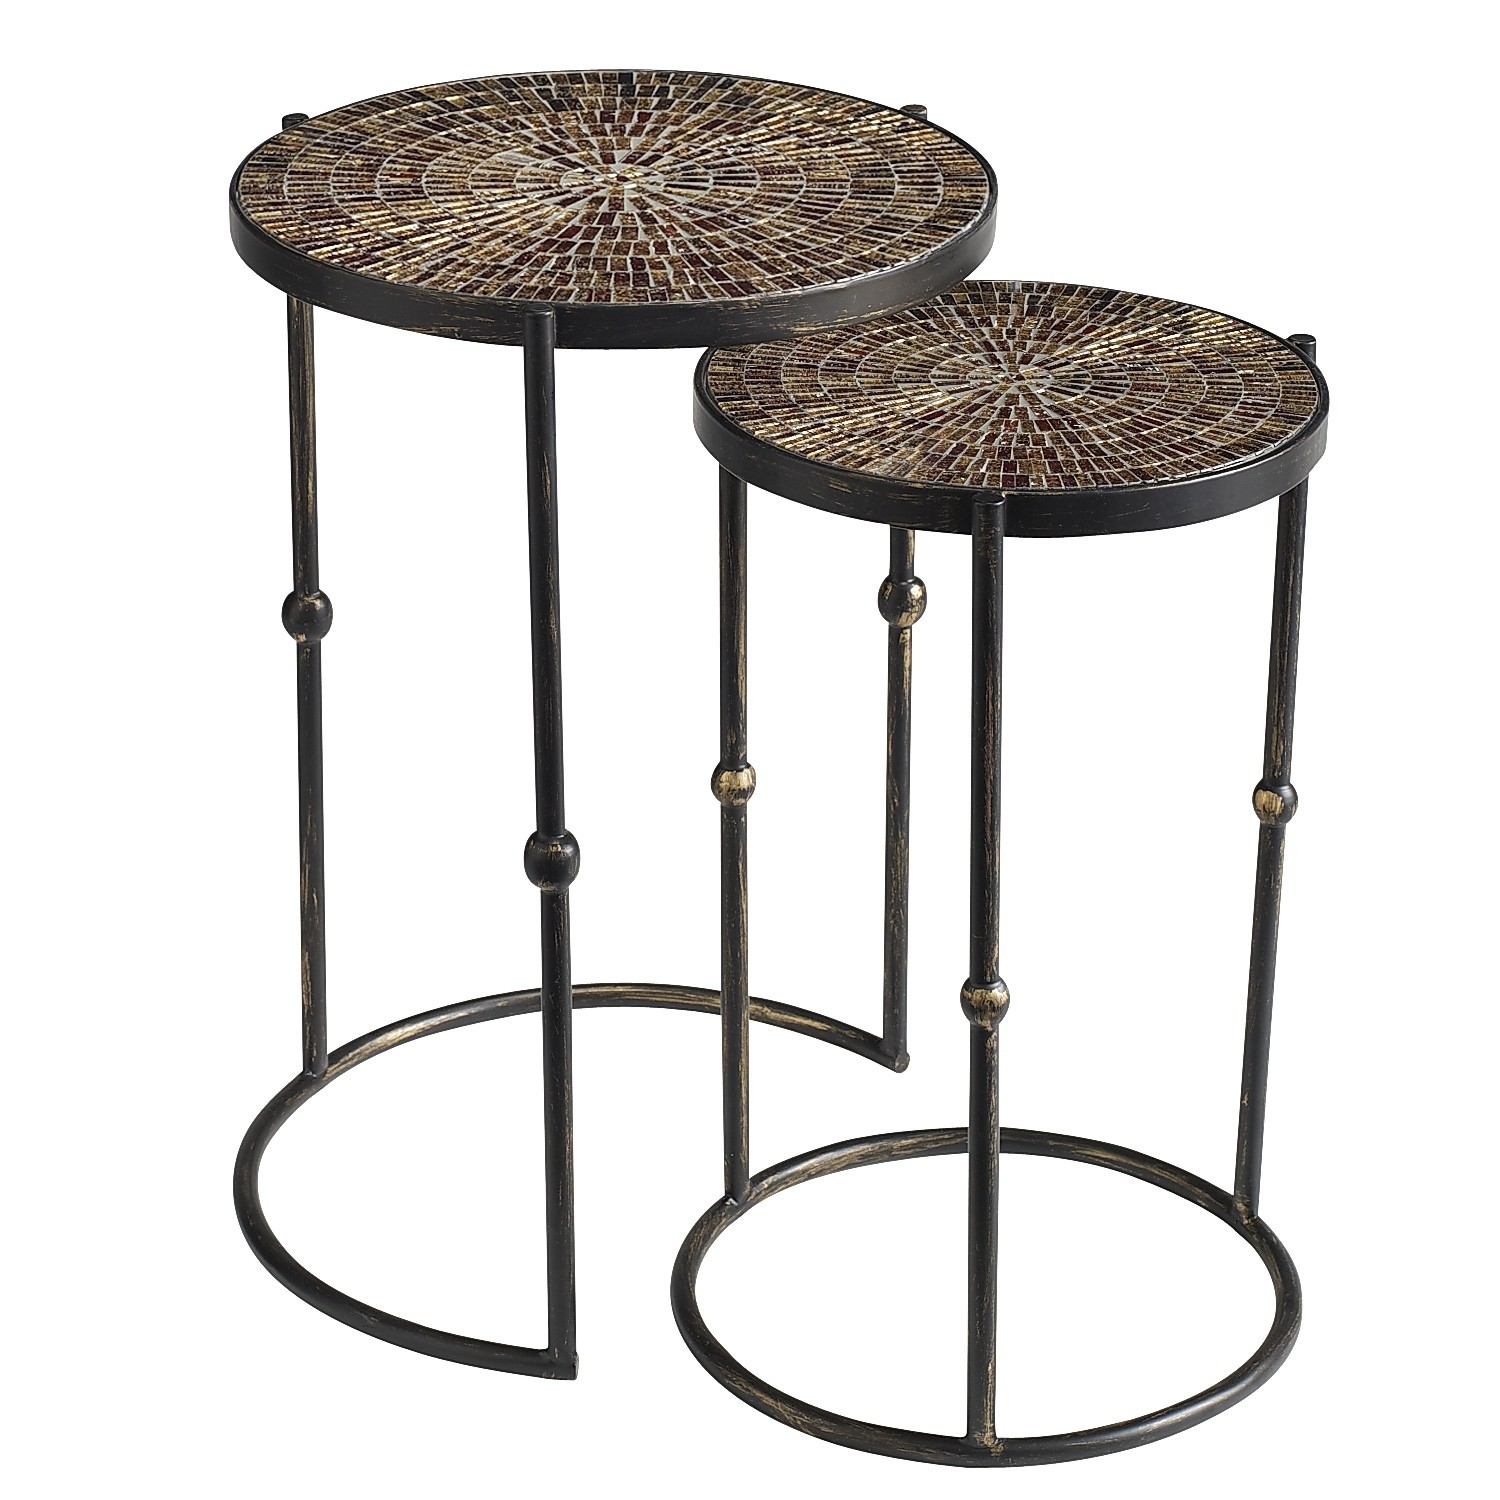 Mosaic gold nesting tables pier1